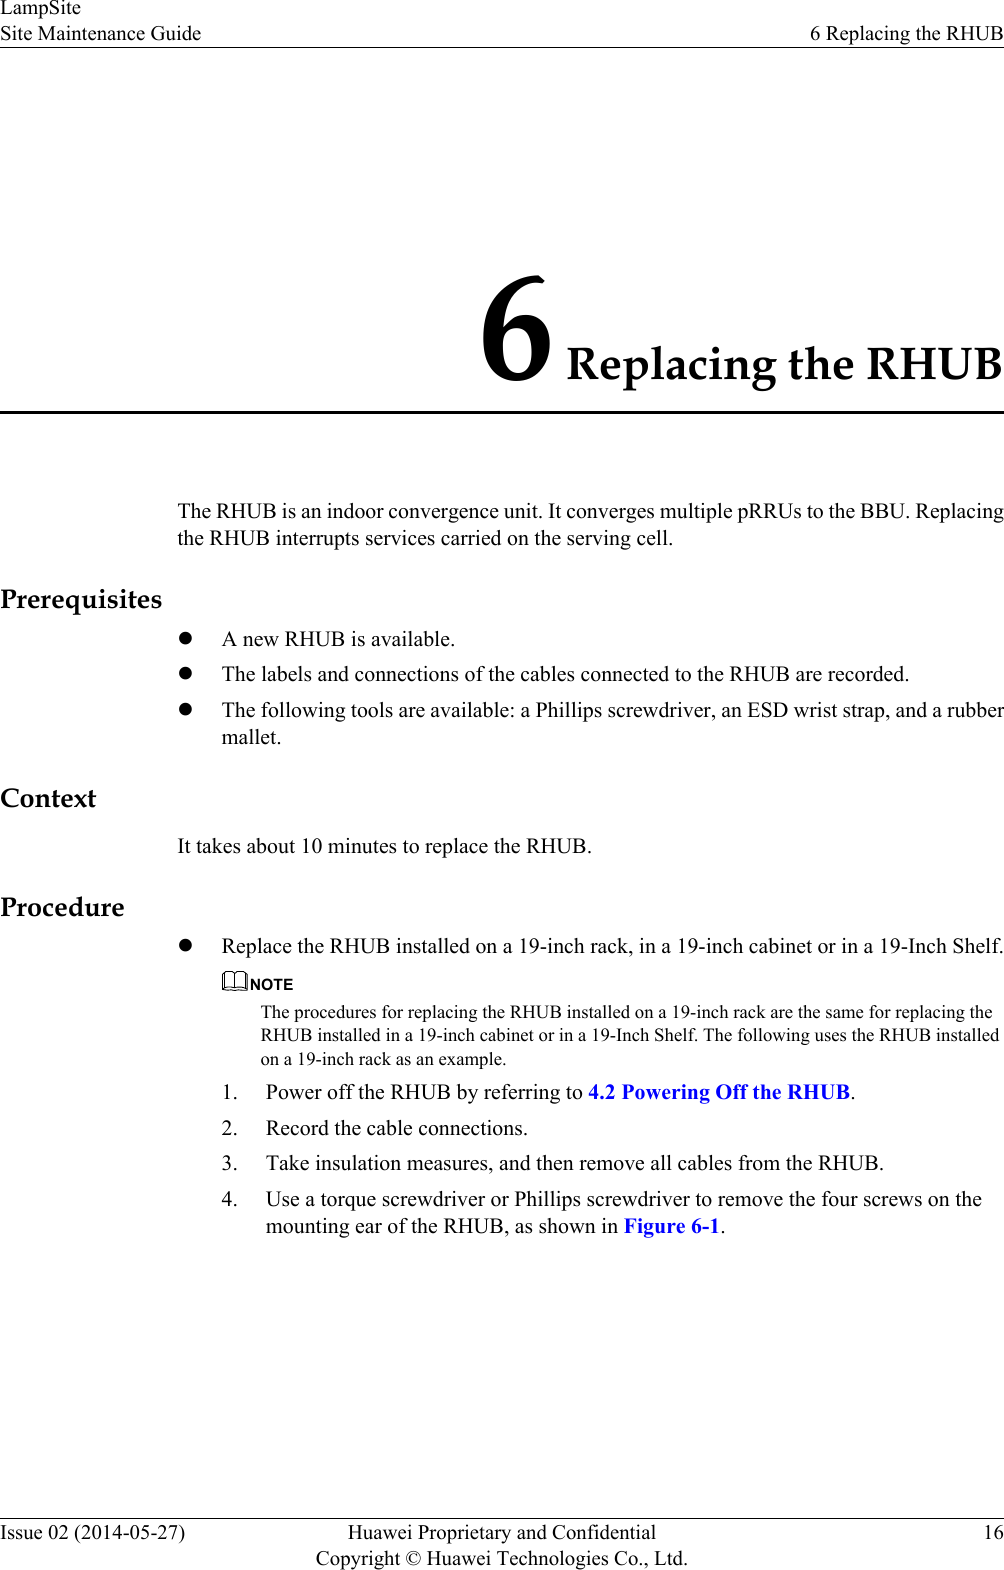 6 Replacing the RHUBThe RHUB is an indoor convergence unit. It converges multiple pRRUs to the BBU. Replacingthe RHUB interrupts services carried on the serving cell.PrerequisiteslA new RHUB is available.lThe labels and connections of the cables connected to the RHUB are recorded.lThe following tools are available: a Phillips screwdriver, an ESD wrist strap, and a rubbermallet.ContextIt takes about 10 minutes to replace the RHUB.ProcedurelReplace the RHUB installed on a 19-inch rack, in a 19-inch cabinet or in a 19-Inch Shelf.NOTEThe procedures for replacing the RHUB installed on a 19-inch rack are the same for replacing theRHUB installed in a 19-inch cabinet or in a 19-Inch Shelf. The following uses the RHUB installedon a 19-inch rack as an example.1. Power off the RHUB by referring to 4.2 Powering Off the RHUB.2. Record the cable connections.3. Take insulation measures, and then remove all cables from the RHUB.4. Use a torque screwdriver or Phillips screwdriver to remove the four screws on themounting ear of the RHUB, as shown in Figure 6-1.LampSiteSite Maintenance Guide 6 Replacing the RHUBIssue 02 (2014-05-27) Huawei Proprietary and ConfidentialCopyright © Huawei Technologies Co., Ltd.16